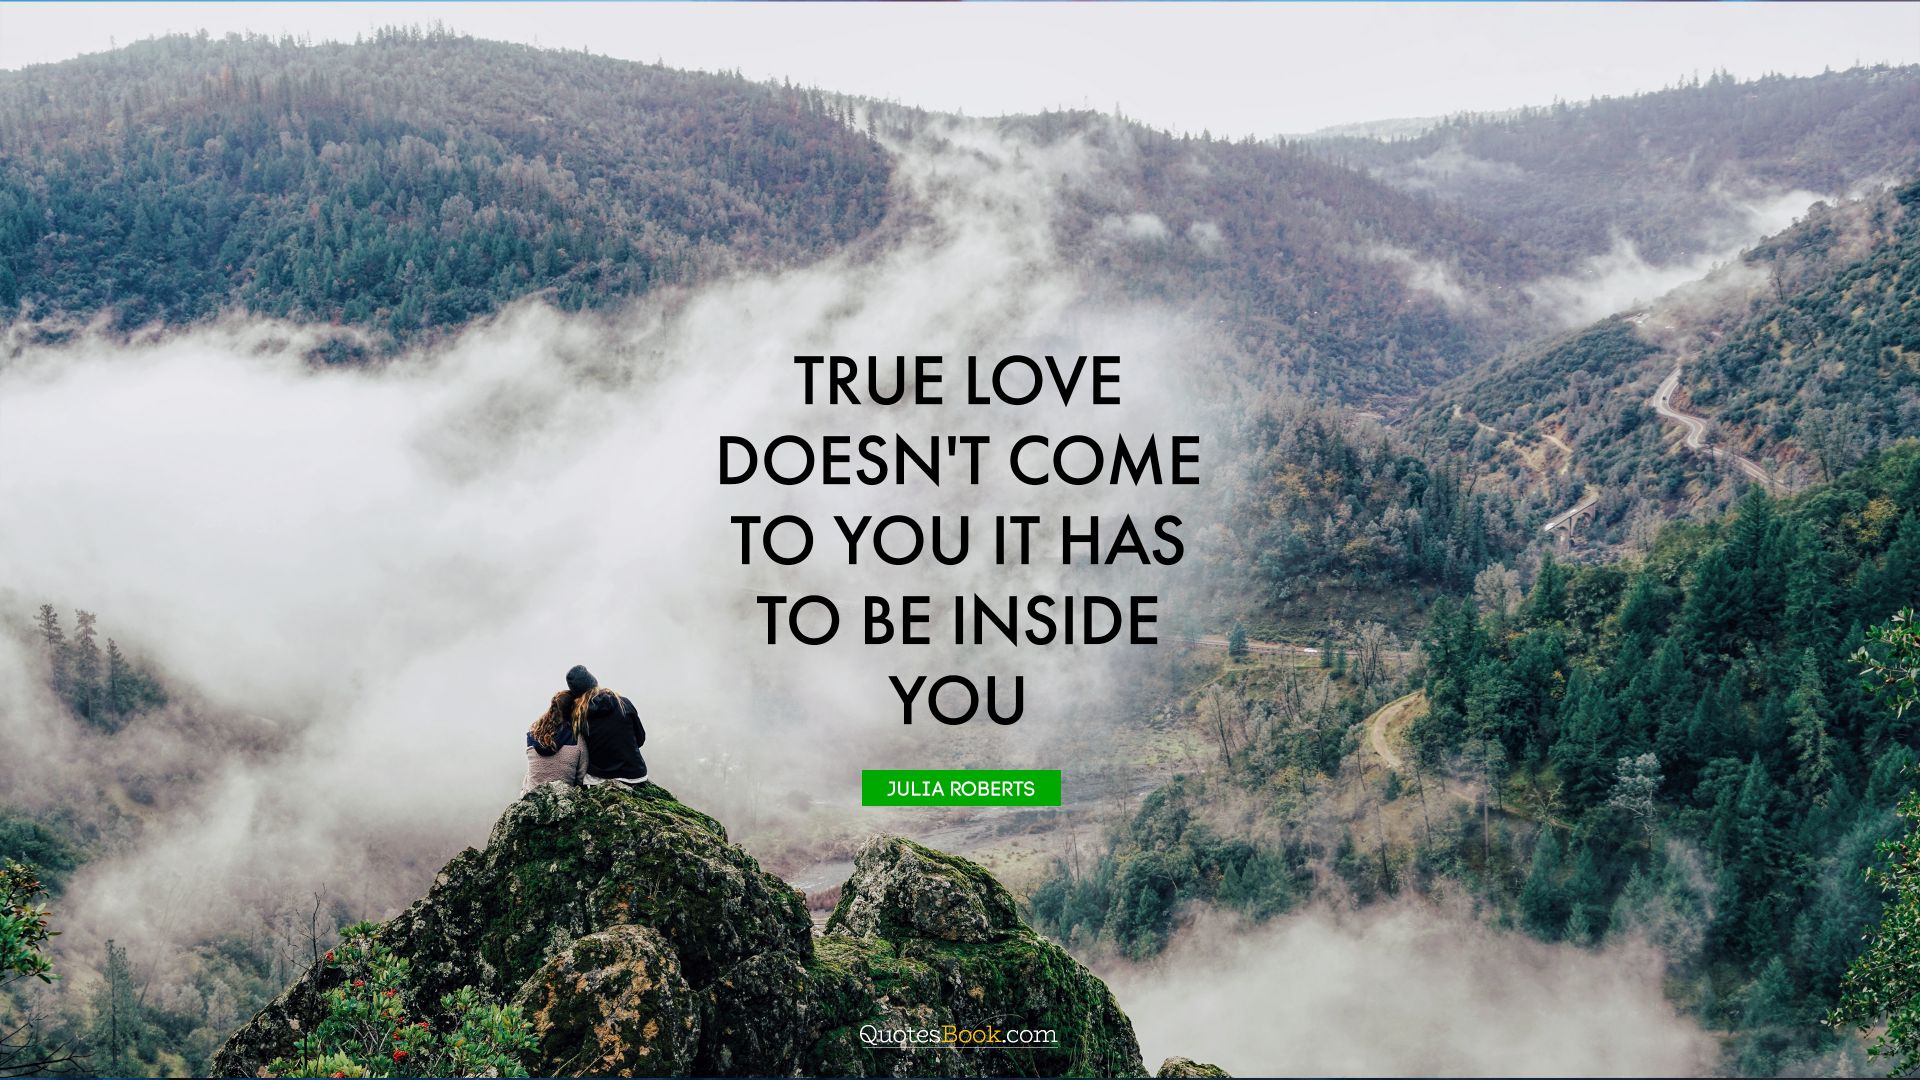 True love doesn't come to you it has to be inside you. - Quote by Julia Roberts